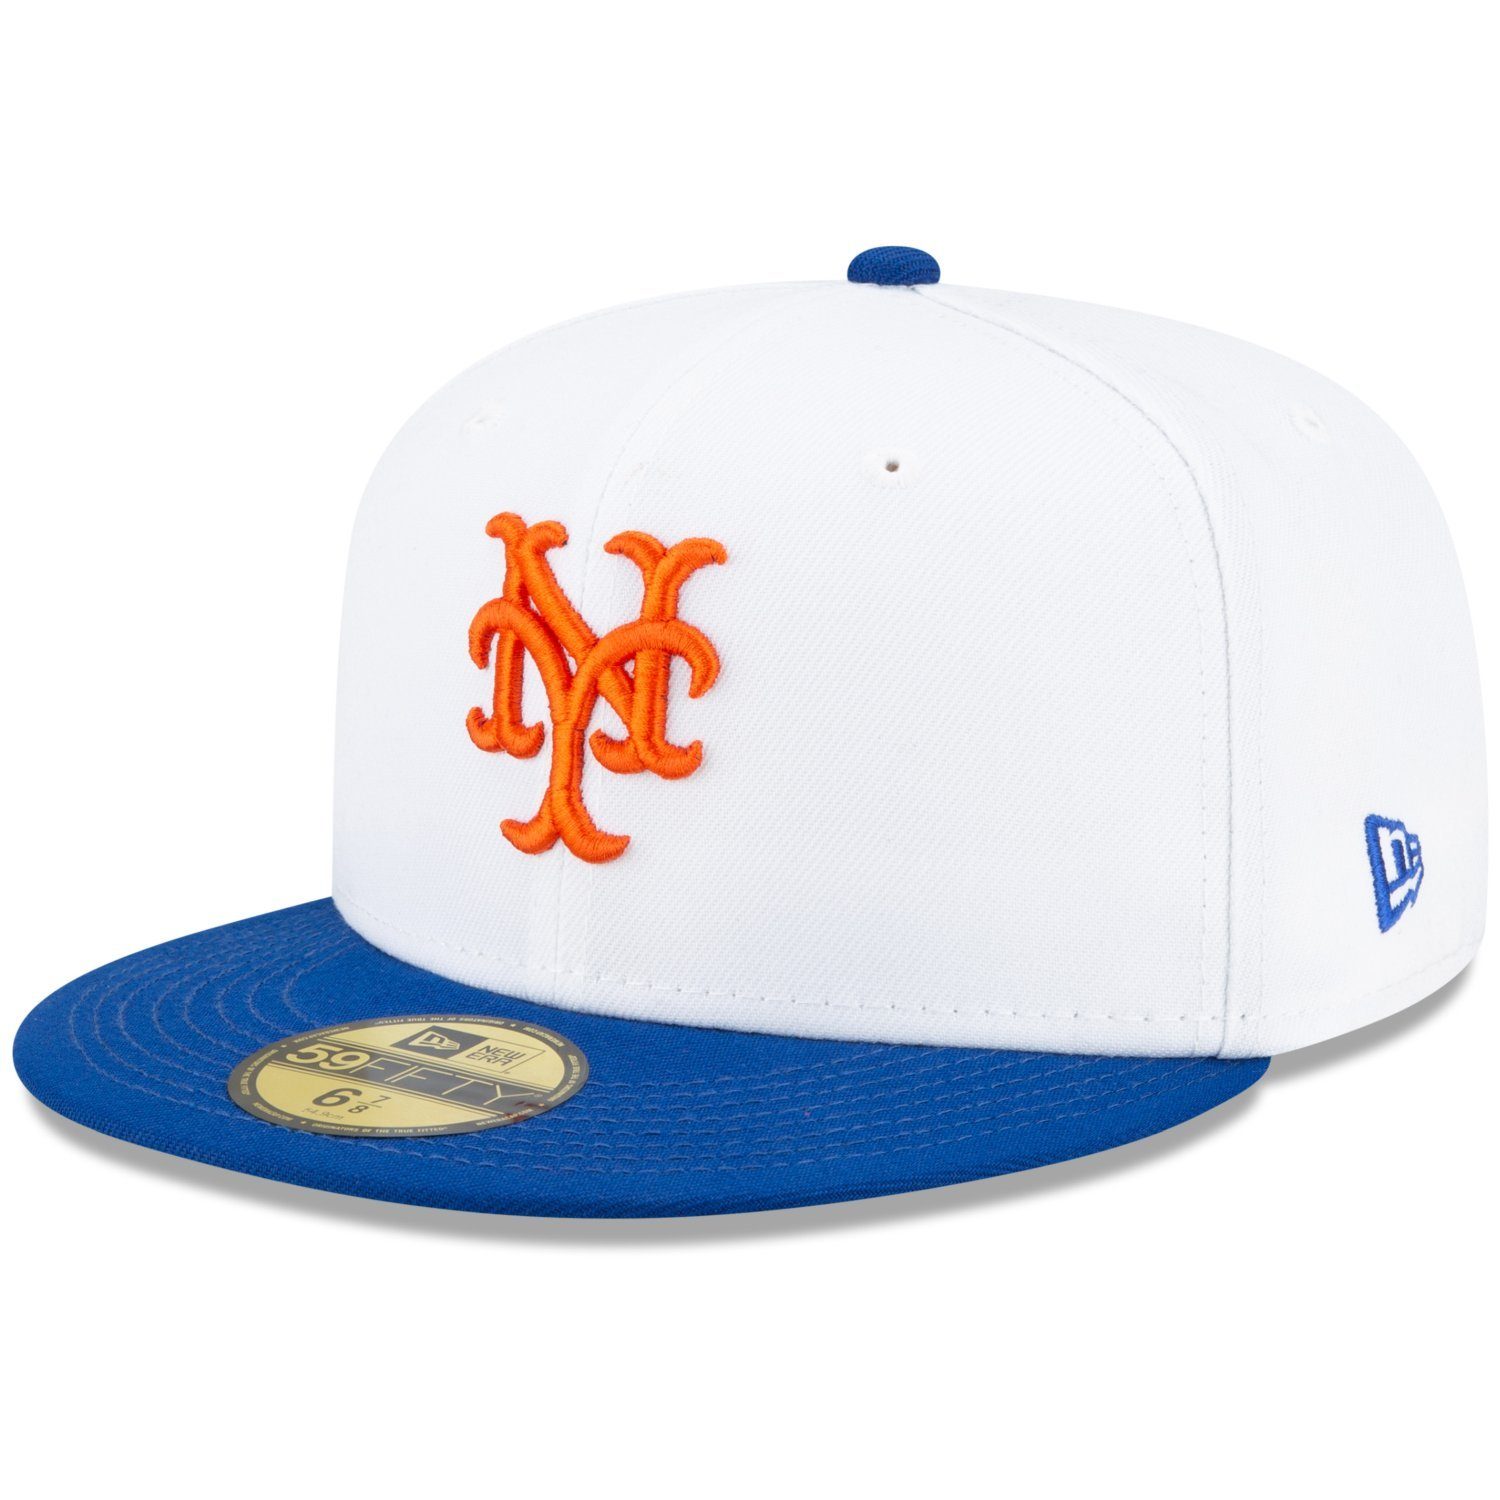 Fitted Mets Era Cap New 59Fifty York New WORLD 1969 SERIES